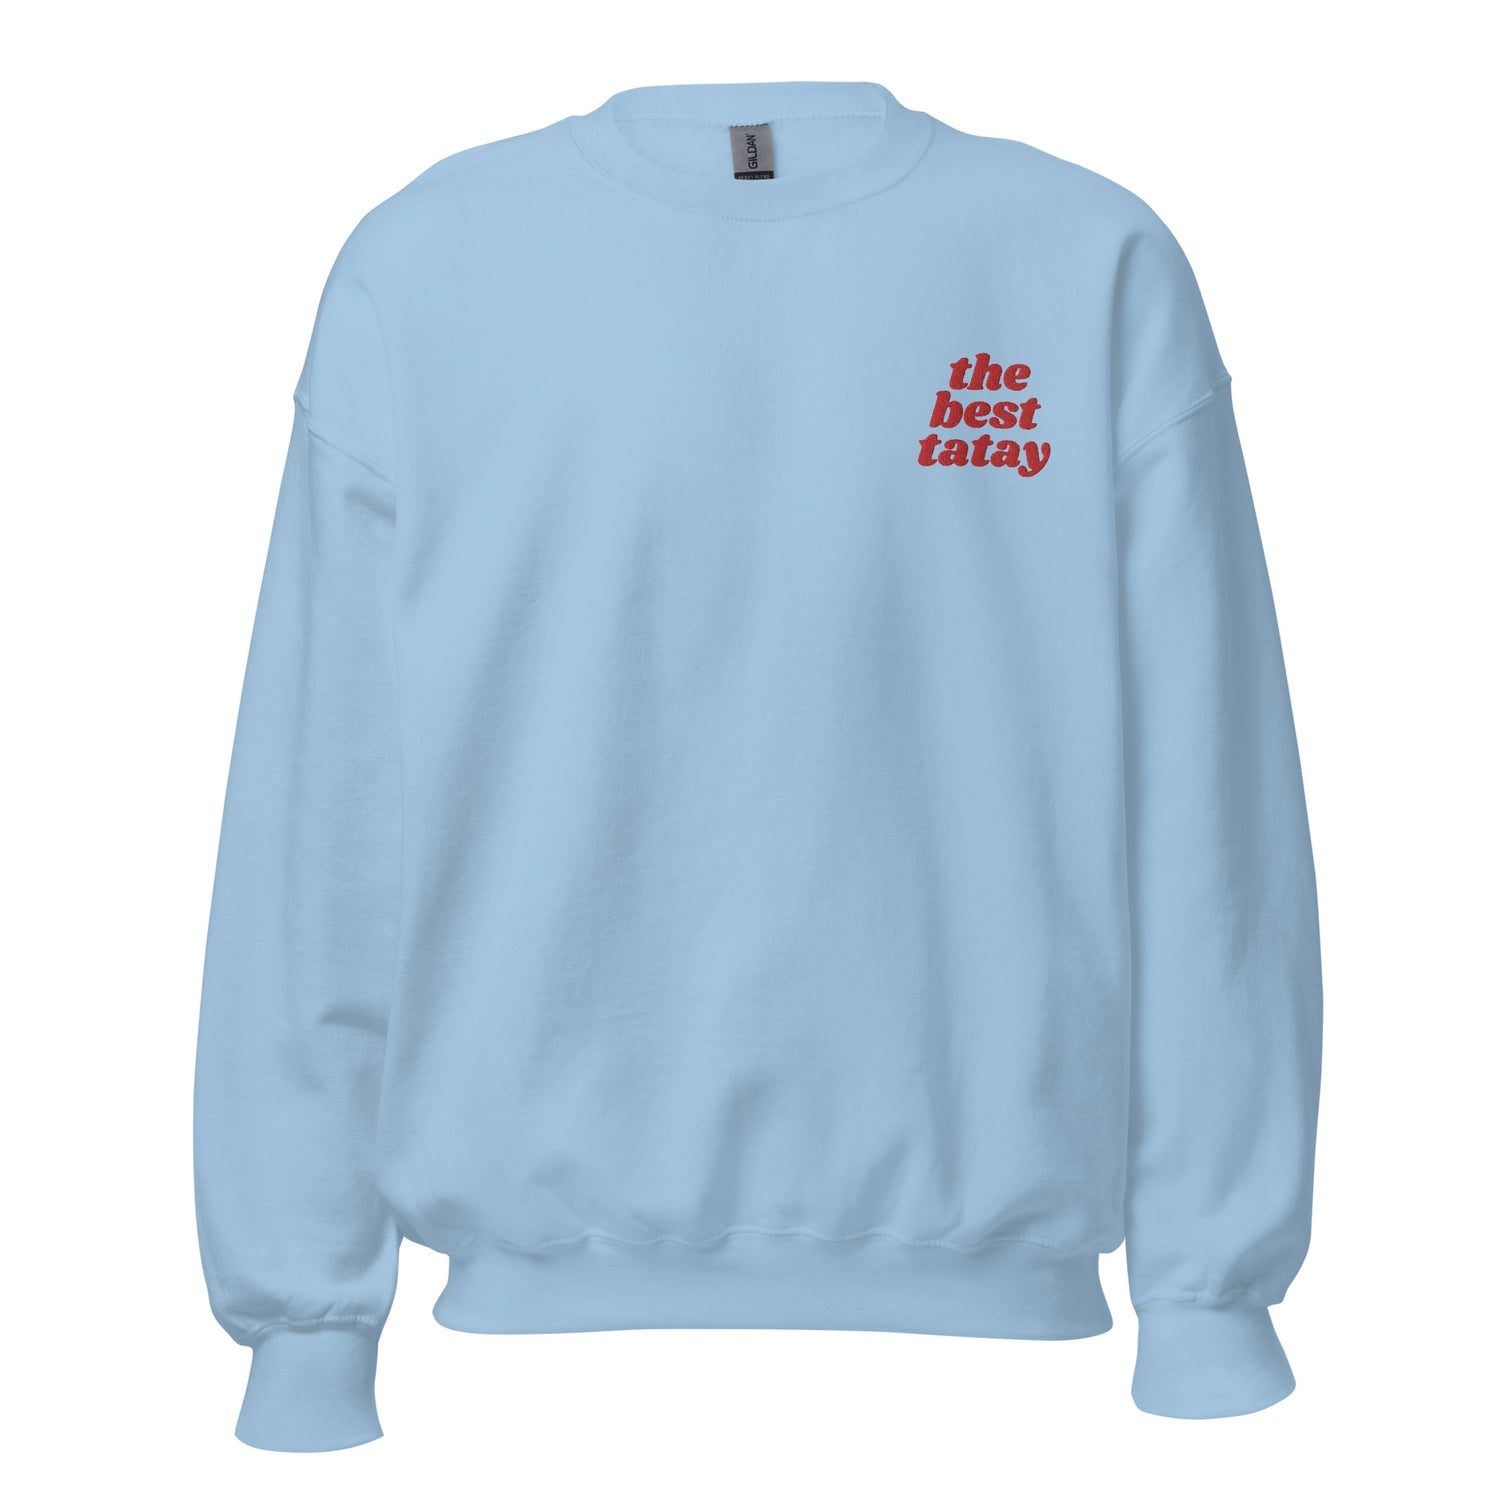 Filipino Sweatshirt Crew Neck The Best Tatay Super Dad Embroidered Father's Day Gift in color variant Light Blue